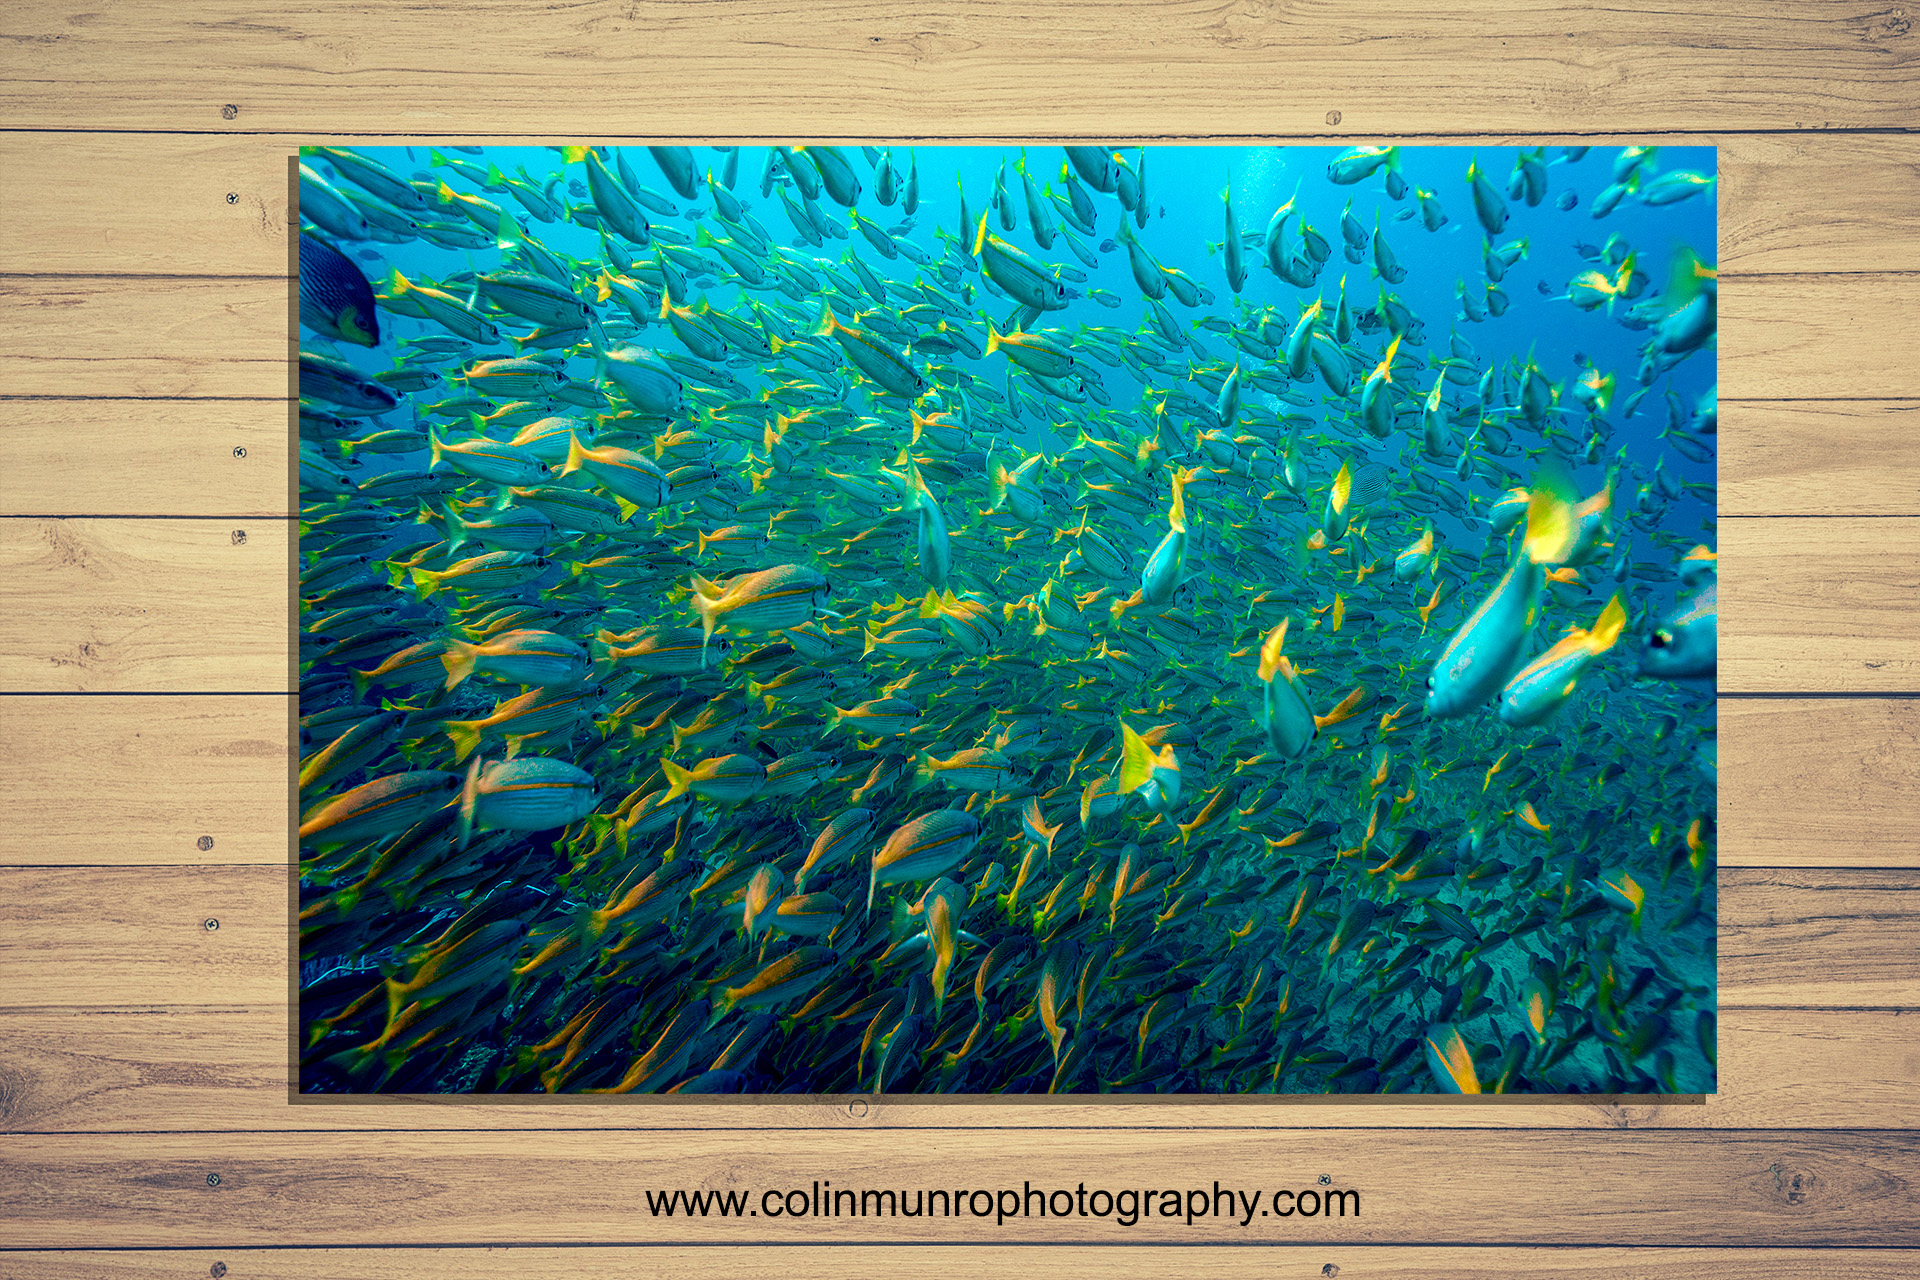 Fine art photographic print of a school of bigeye snappers, Andaman Sea. Colin Munro Photography www.colinmunrophotography.coms